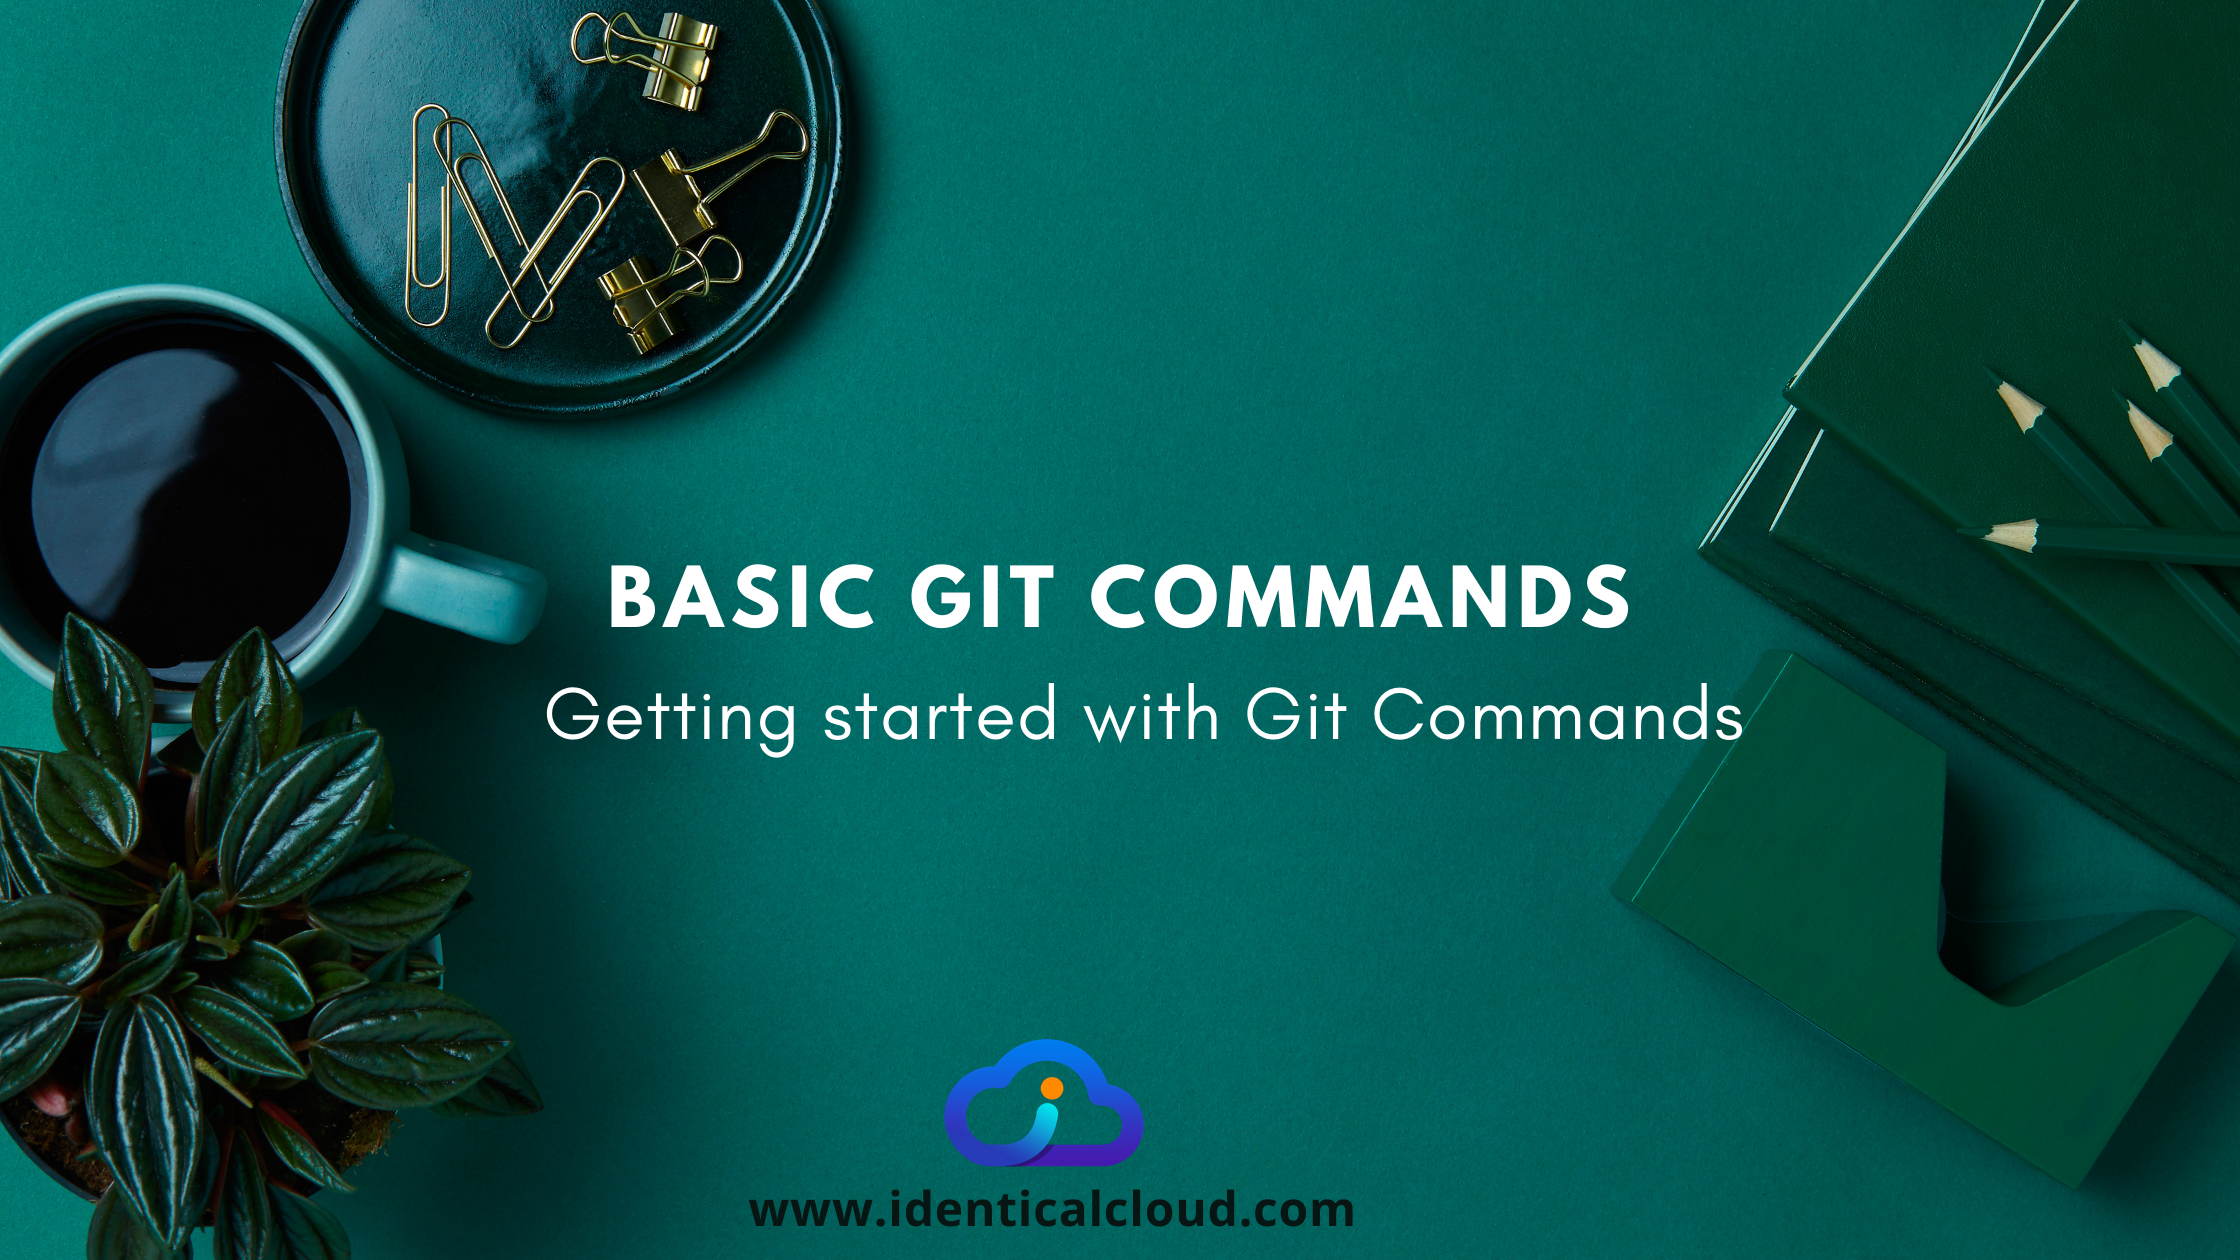 Get started with Git commands